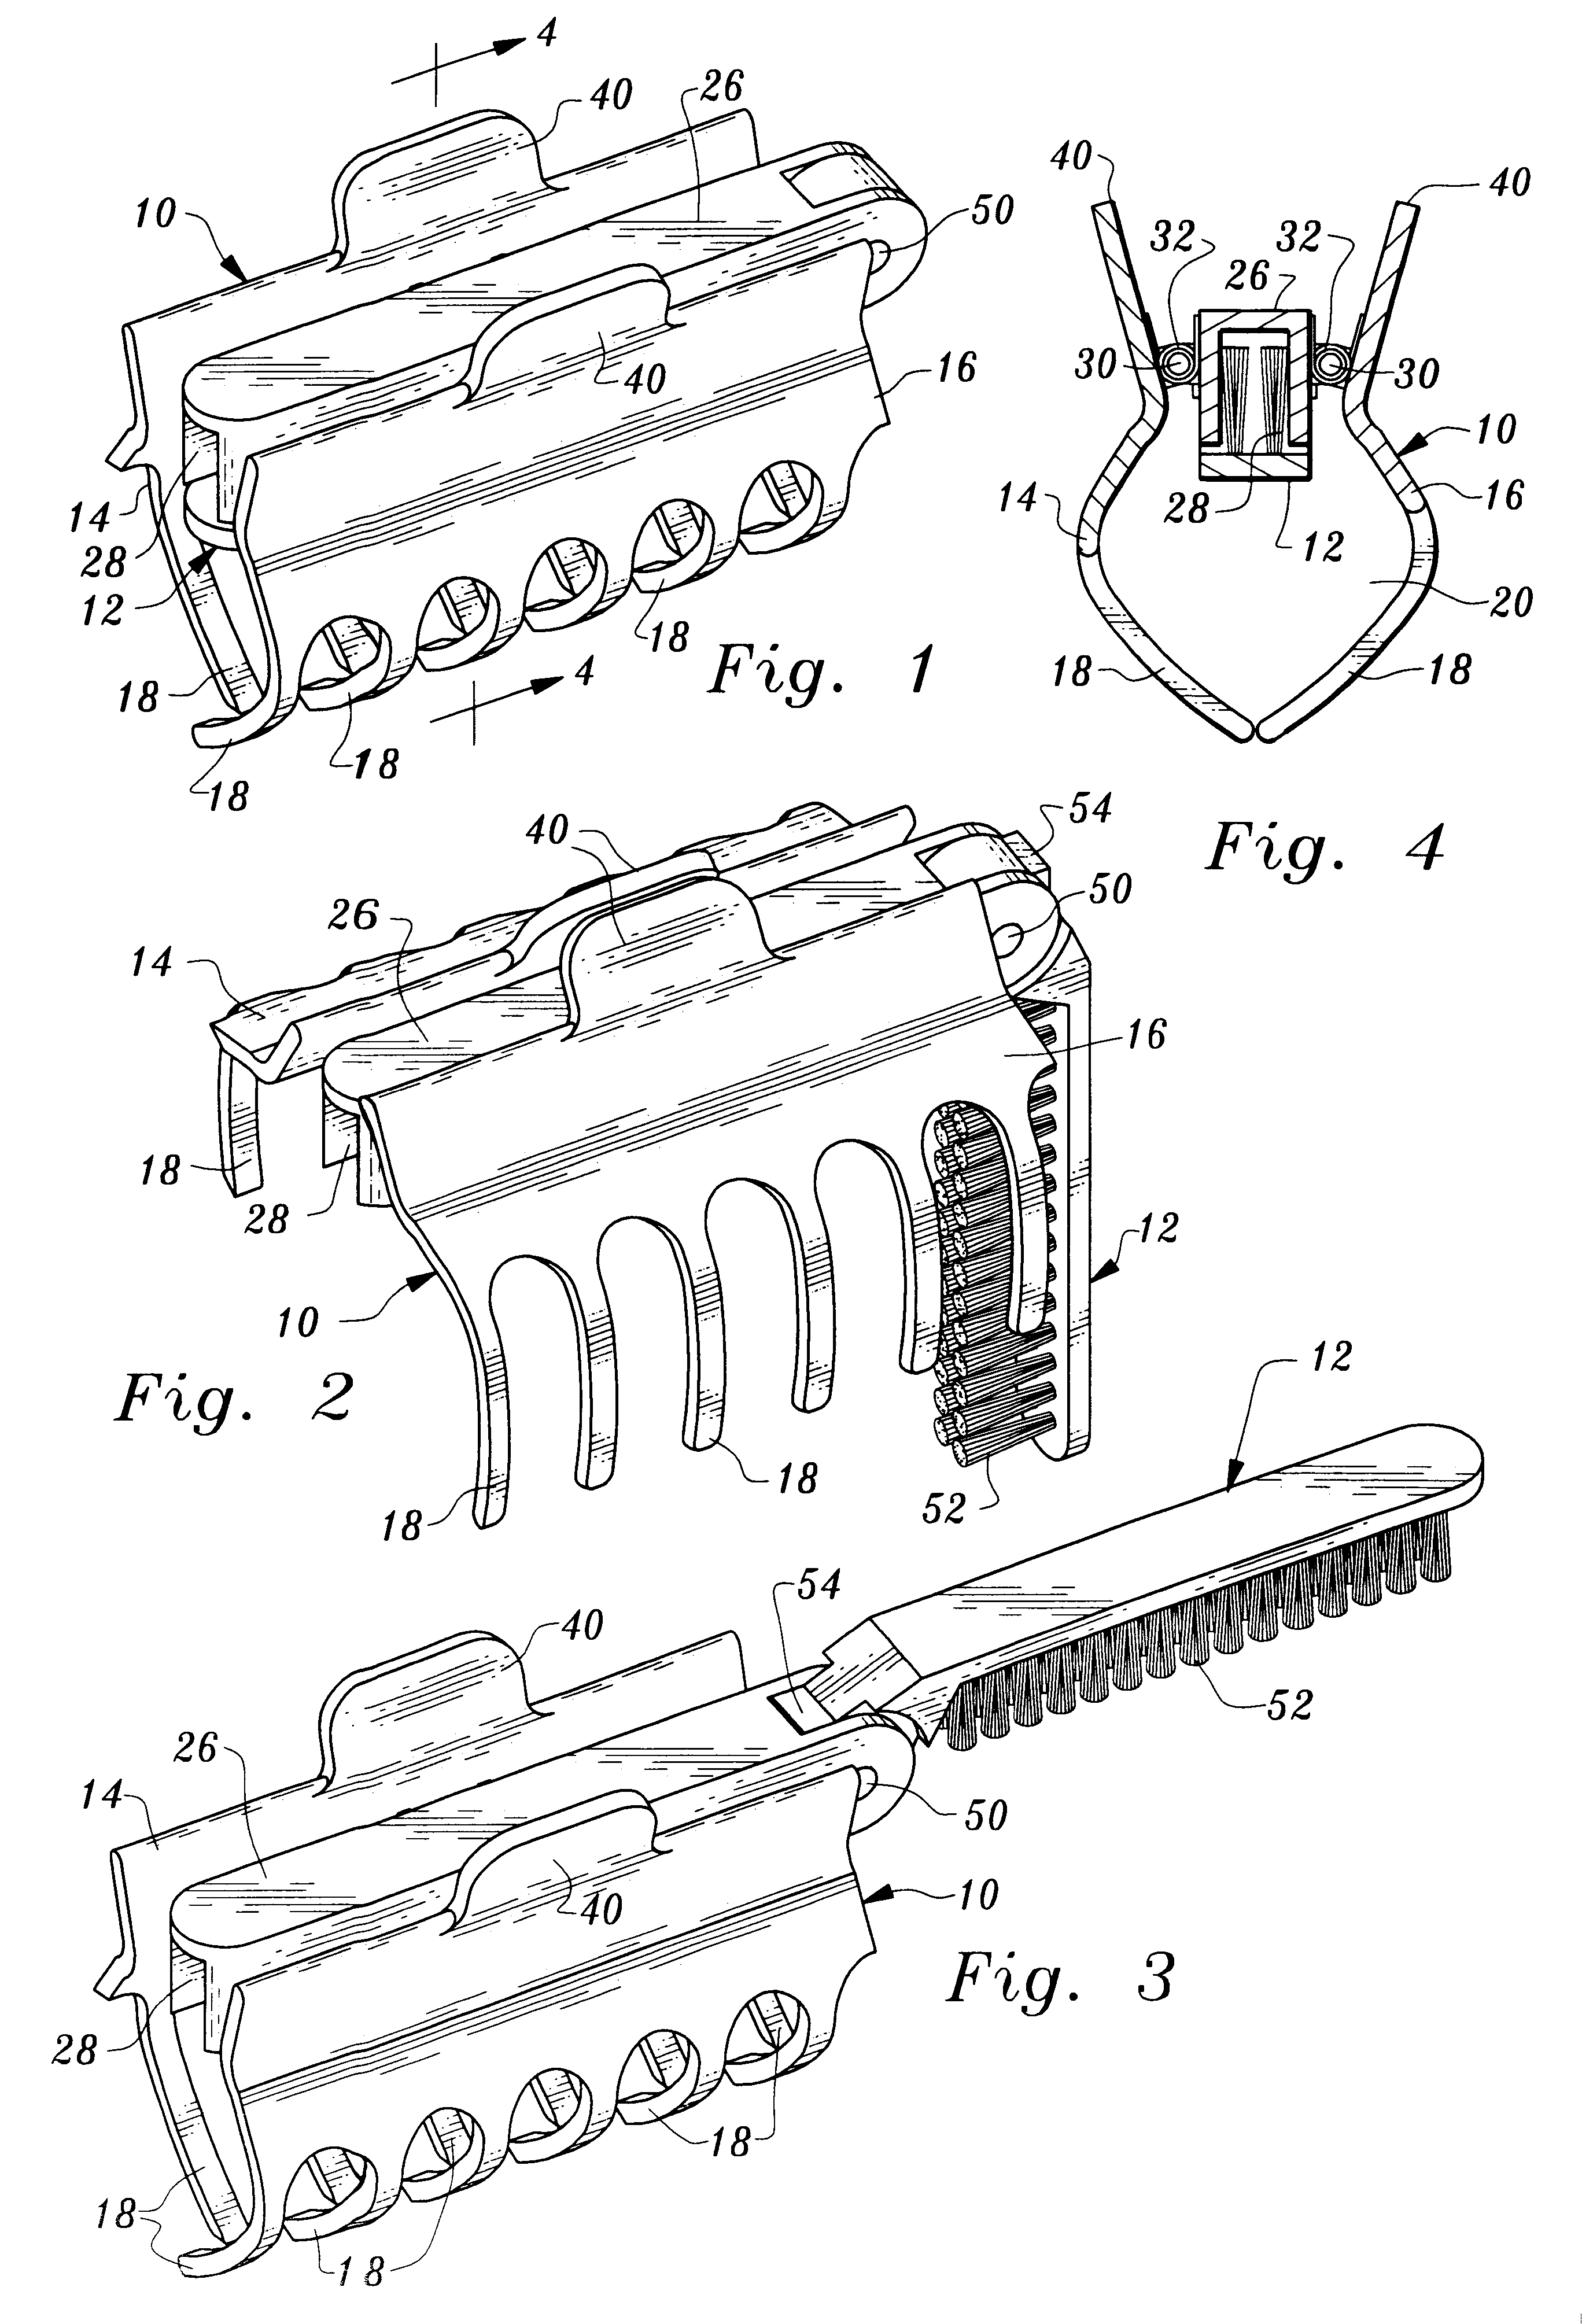 Apparatus for grooming and decorating hair